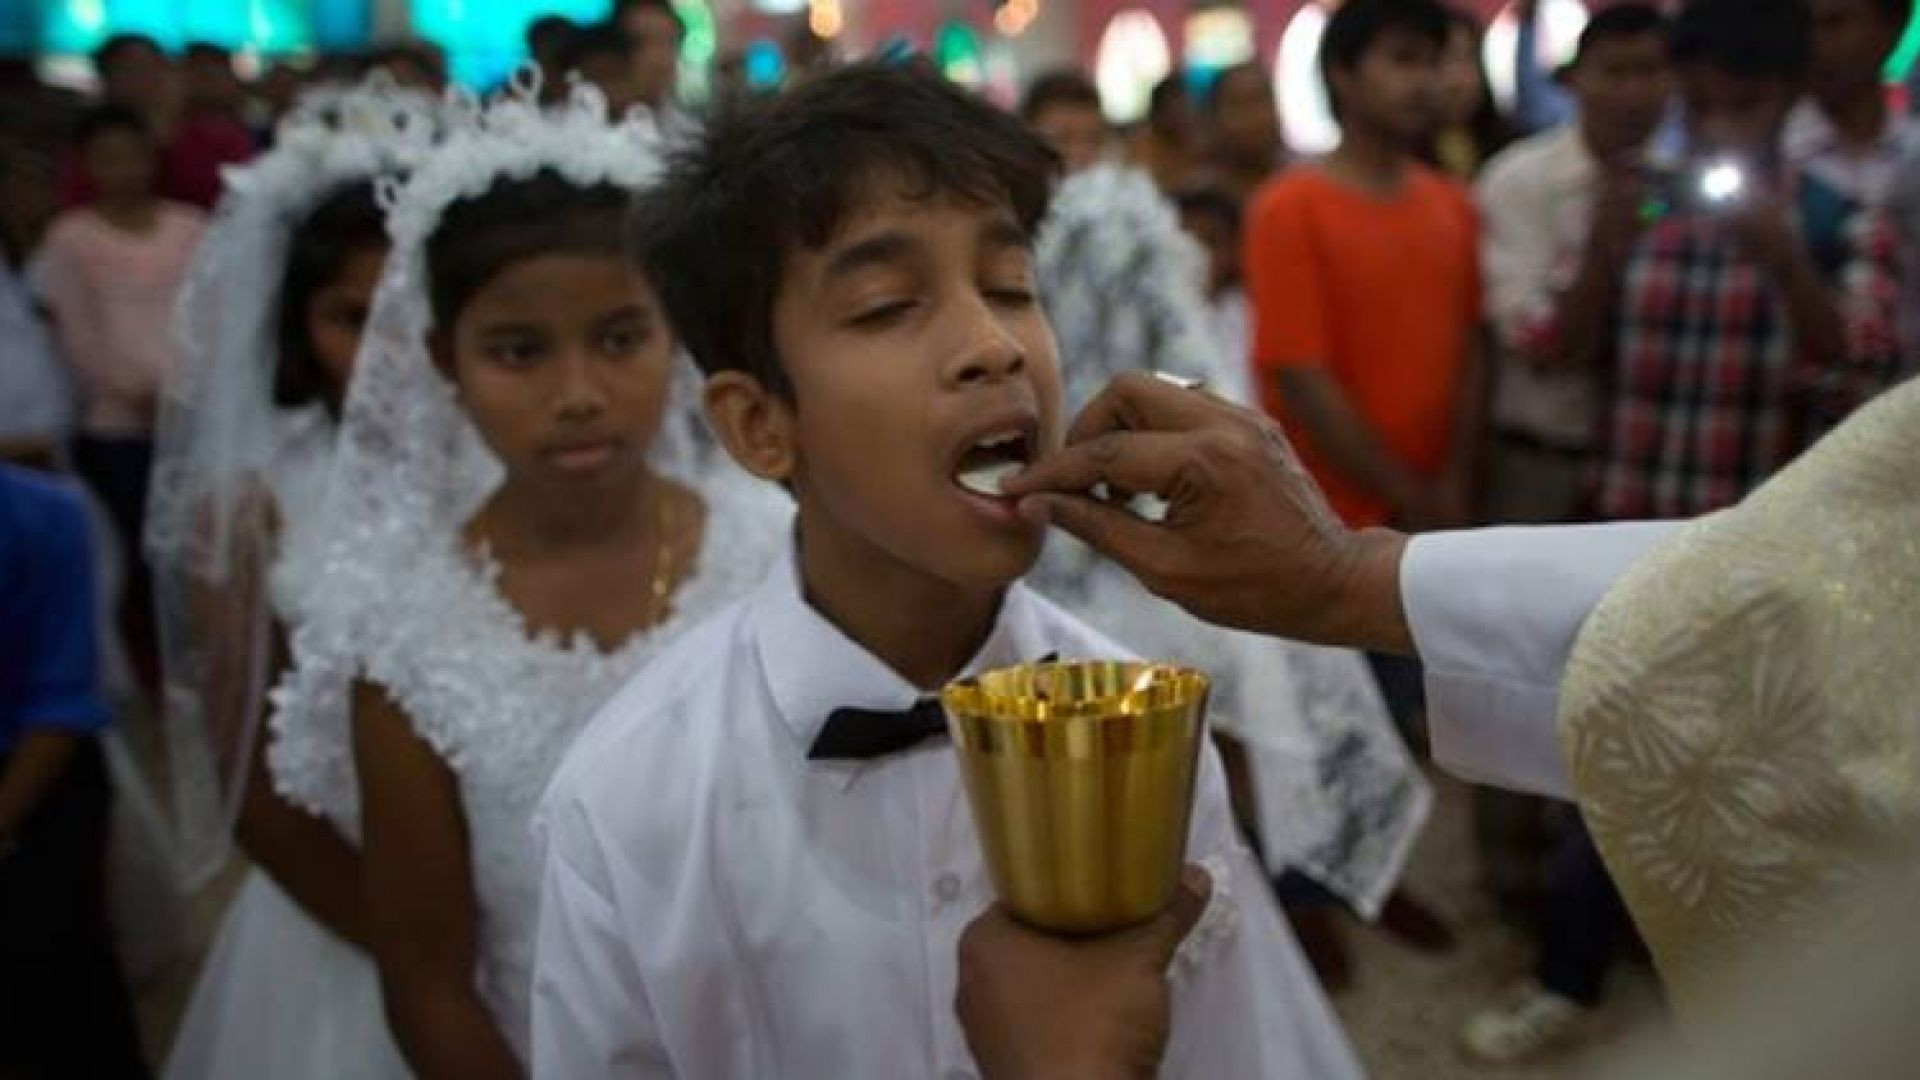 Let Us Not Be Indifferent To Holy Communion